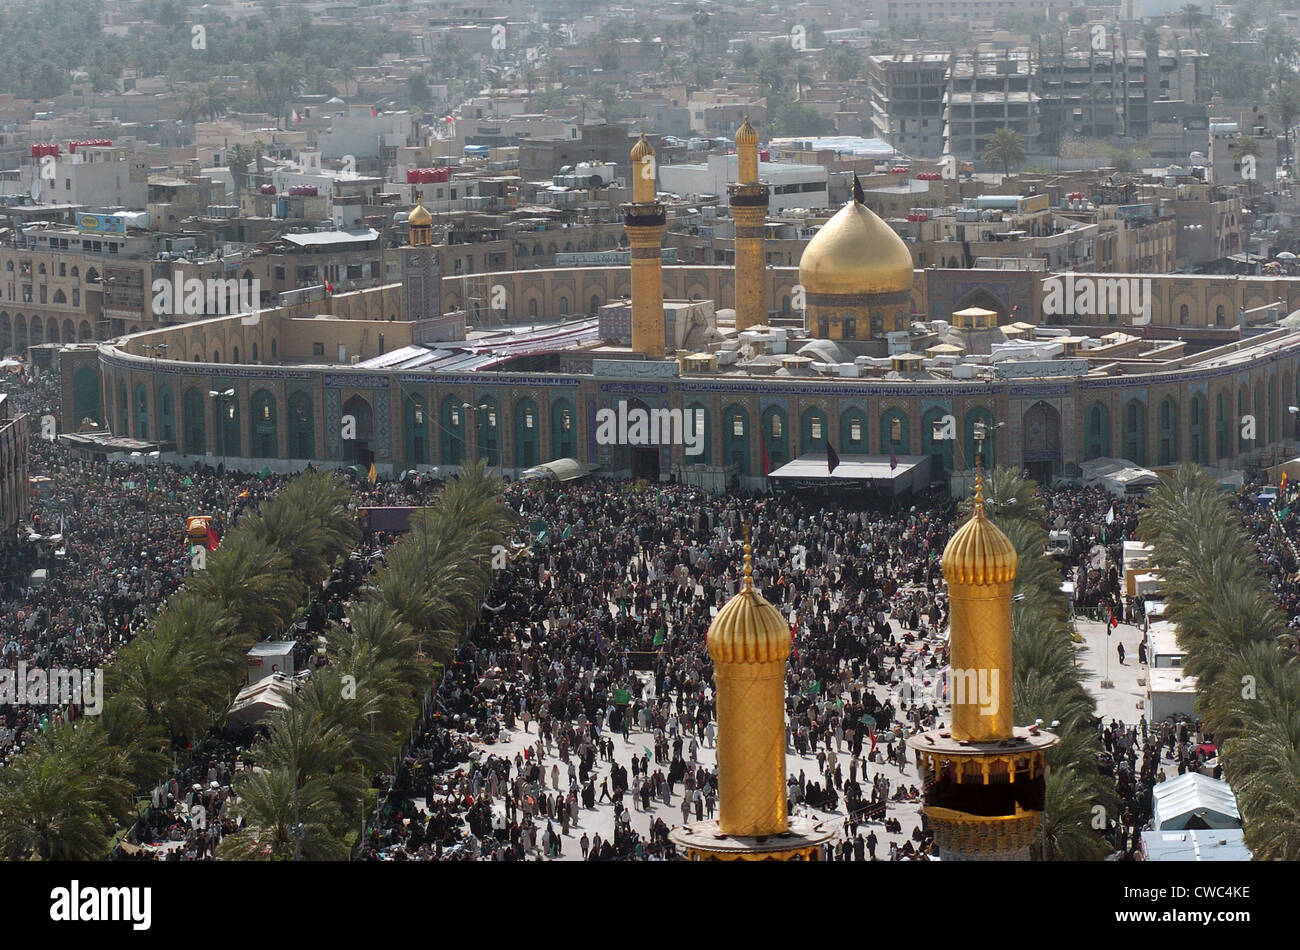 Shia Muslims around the Husayn Mosque in Karbala Iraq after making a pilgrimage in observance of the Arba'een holiday a forty Stock Photo